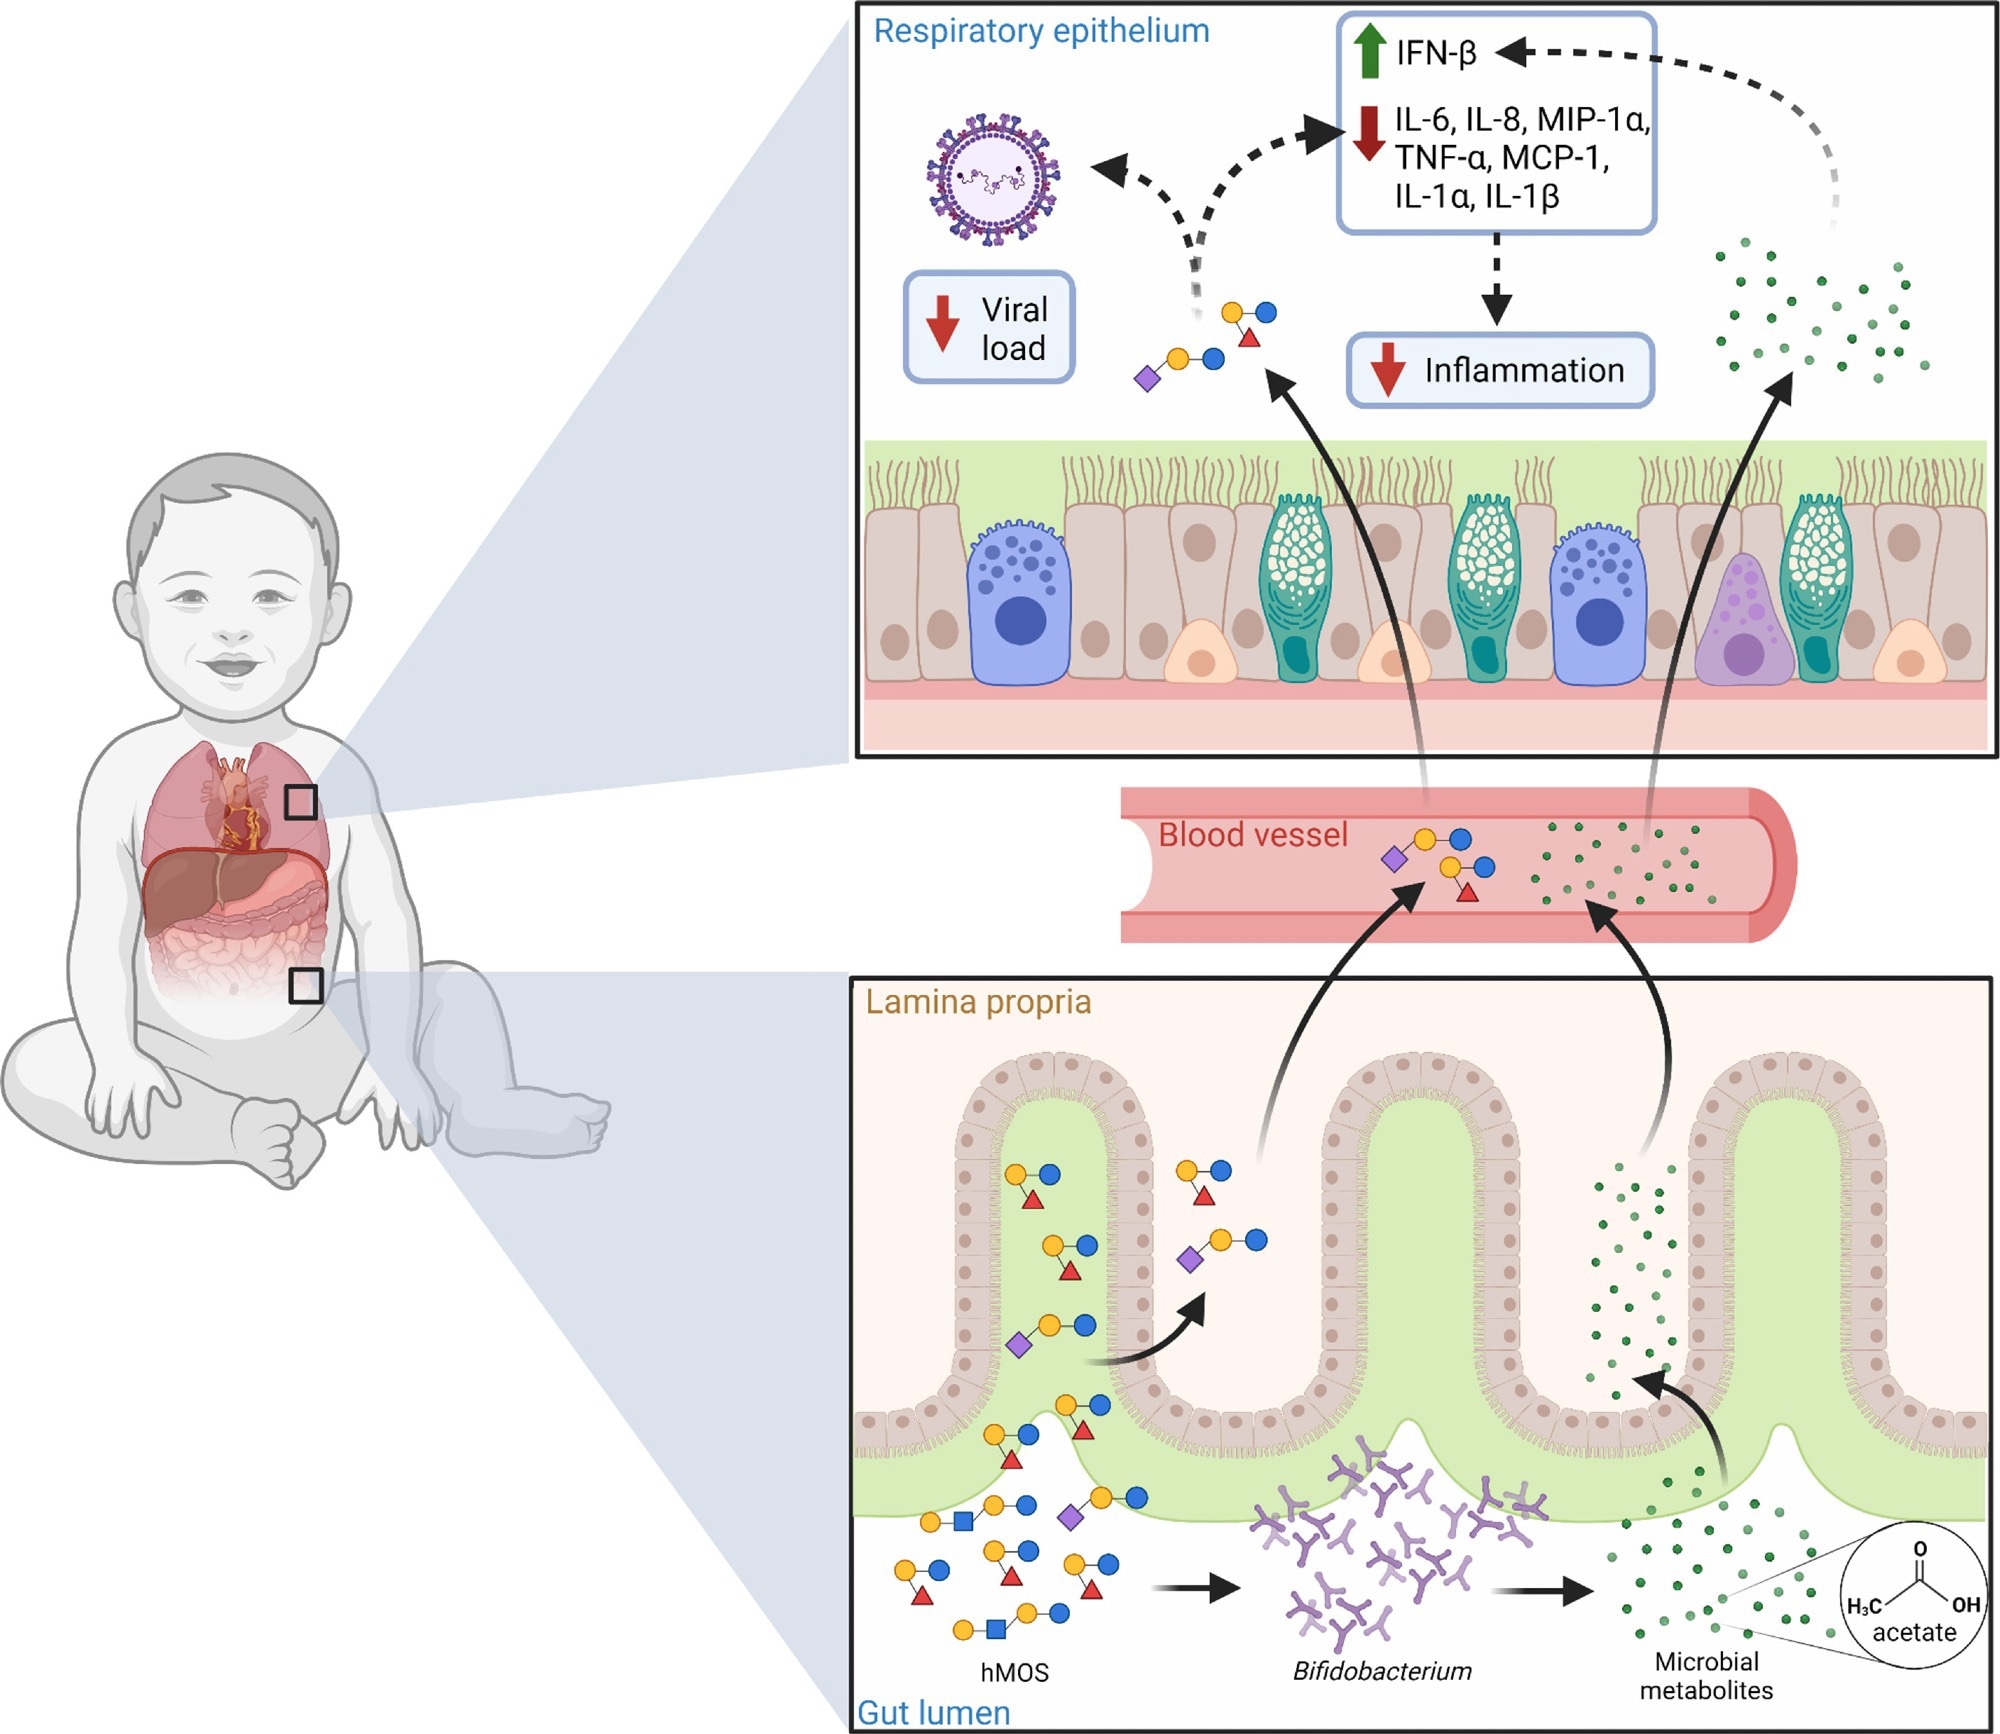 Potential role of hMOS on RSV disease. hMOS such as 2’-FL and LNnT are metabolized by Bifidobacterium in the infant’s gut into short-chain fatty acids, like acetate. Small quantities of hMOS and acetate are absorbed and can reach the lungs through the circulation, where they could act as antivirals and modulate inflammation. Small quantities of hMOS and short-chain fatty acids could also coat the upper respiratory mucosa in the form of regurgitated milk as seen in the nose of breast-fed infants. Review:  Human milk oligosaccharides and respiratory syncytial virus infection in infants